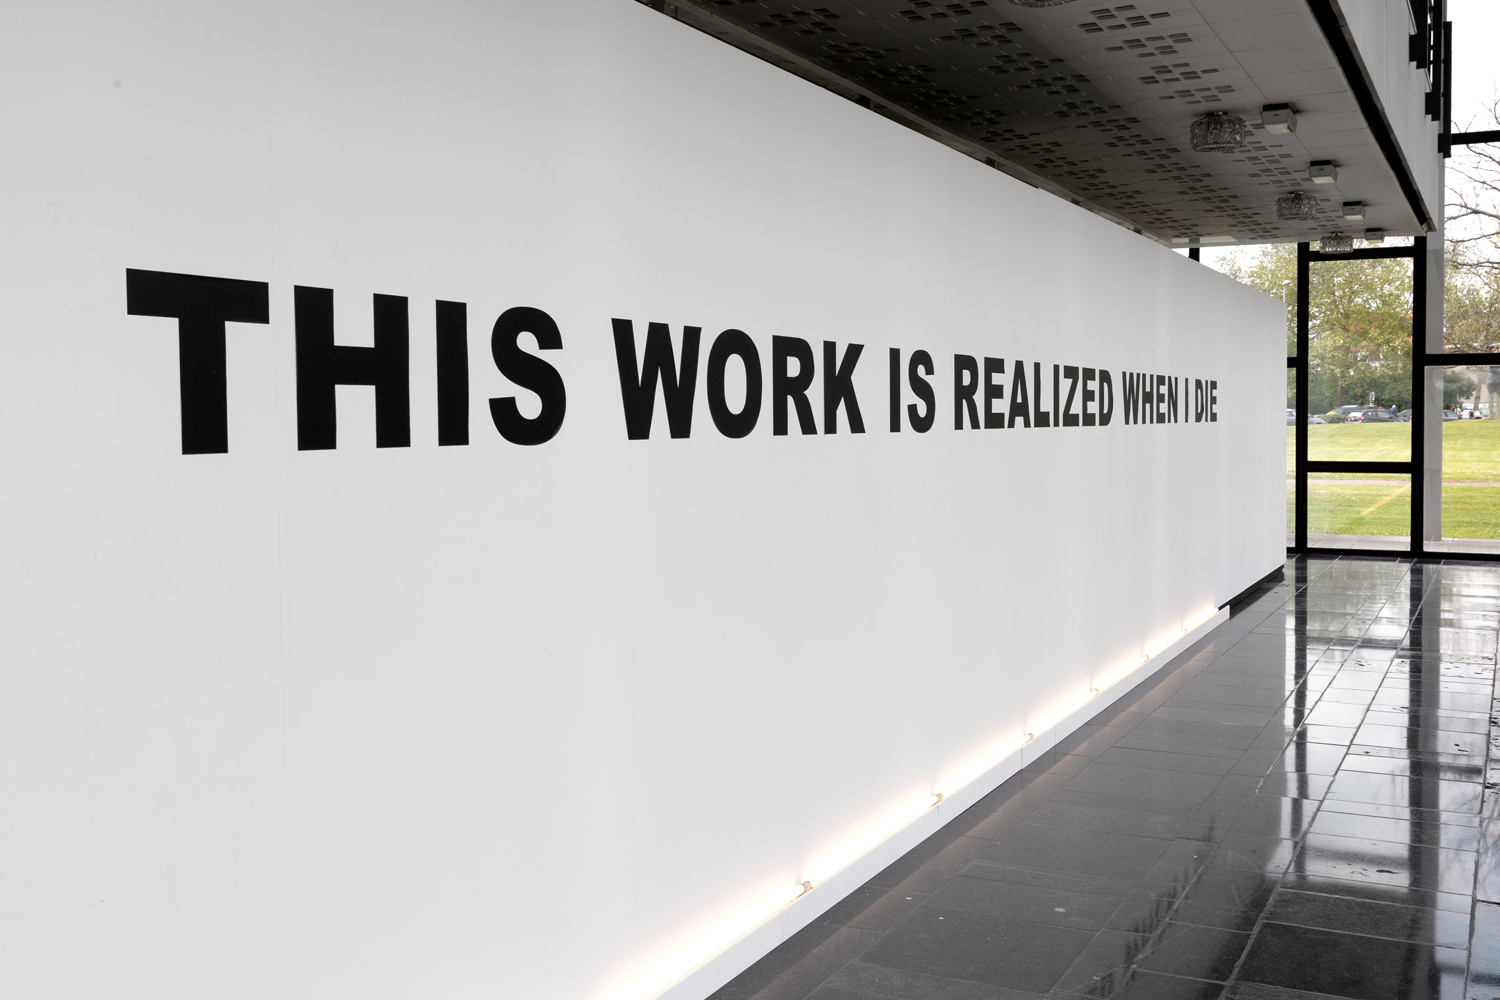 Stefan Brüggemann, ‘This work is realized when I die’, 2013, Vinyl, 3,8x13m, black vinyl letters, Courtesy of the artist and gallery Hauser Wirth